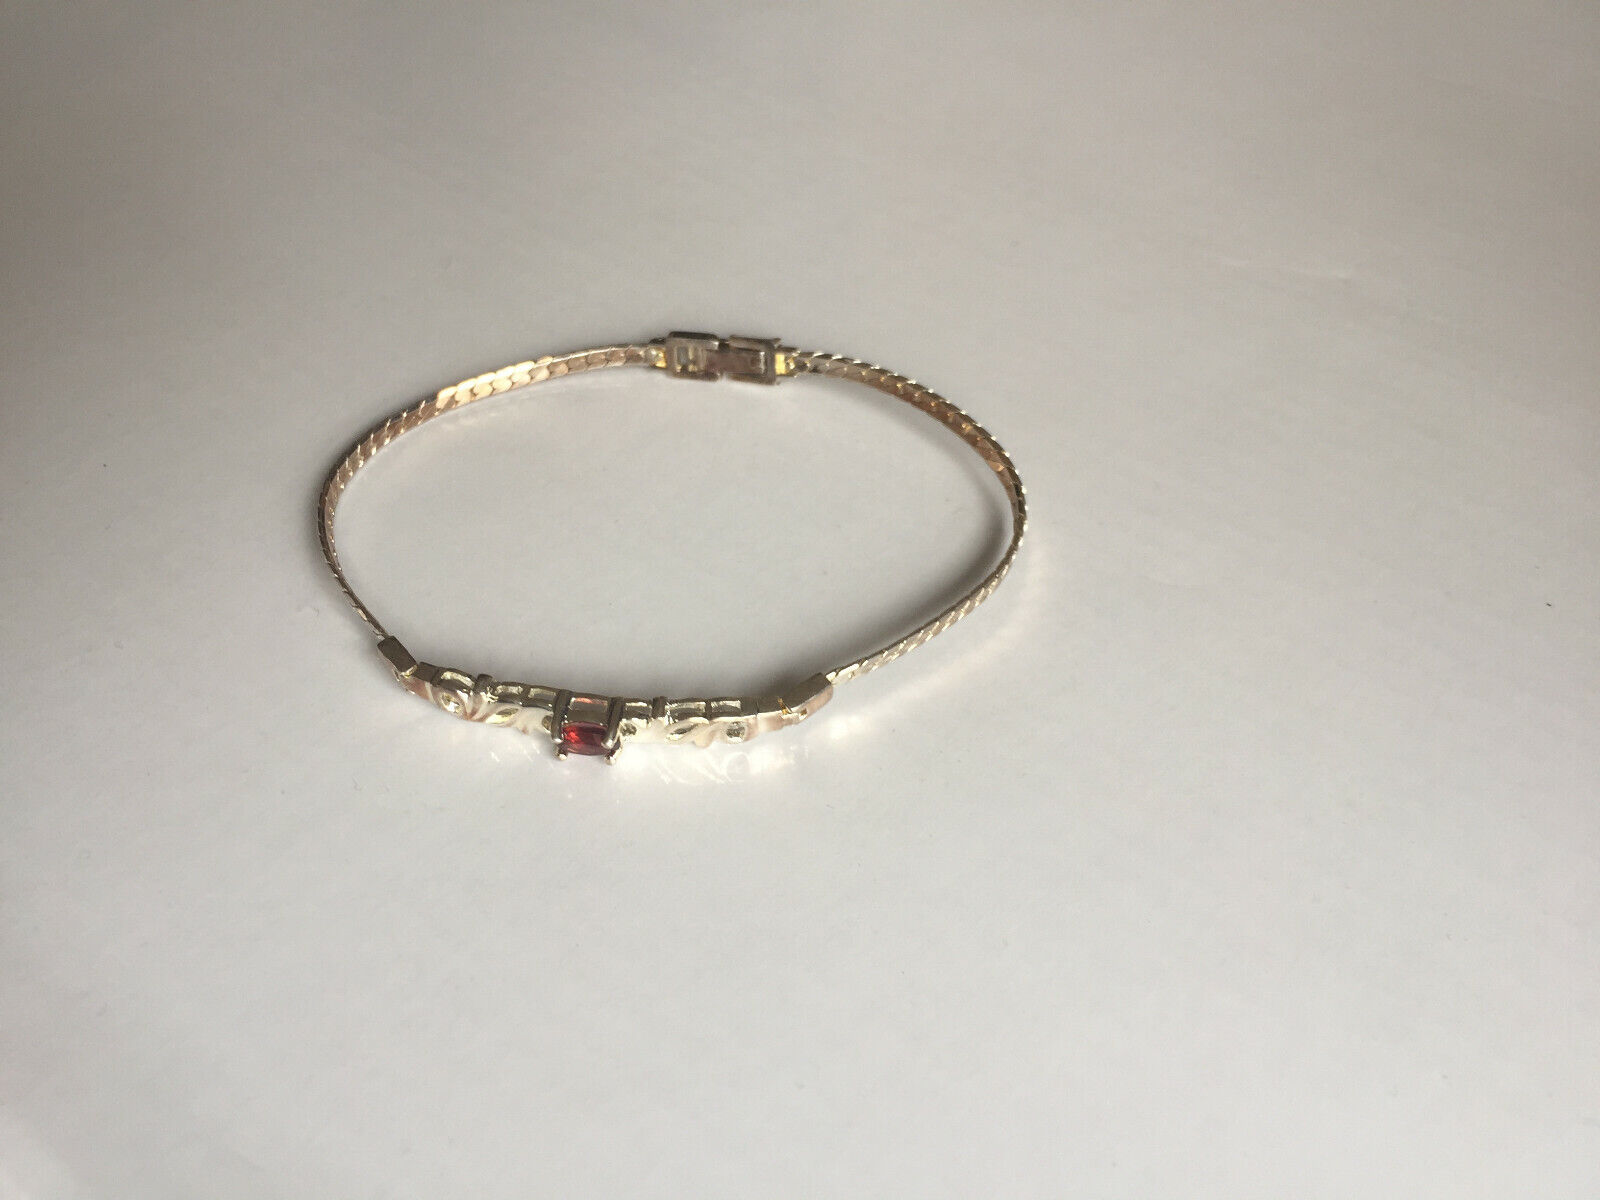 Exquisite Rose Gold Bracelet with agate 7.5